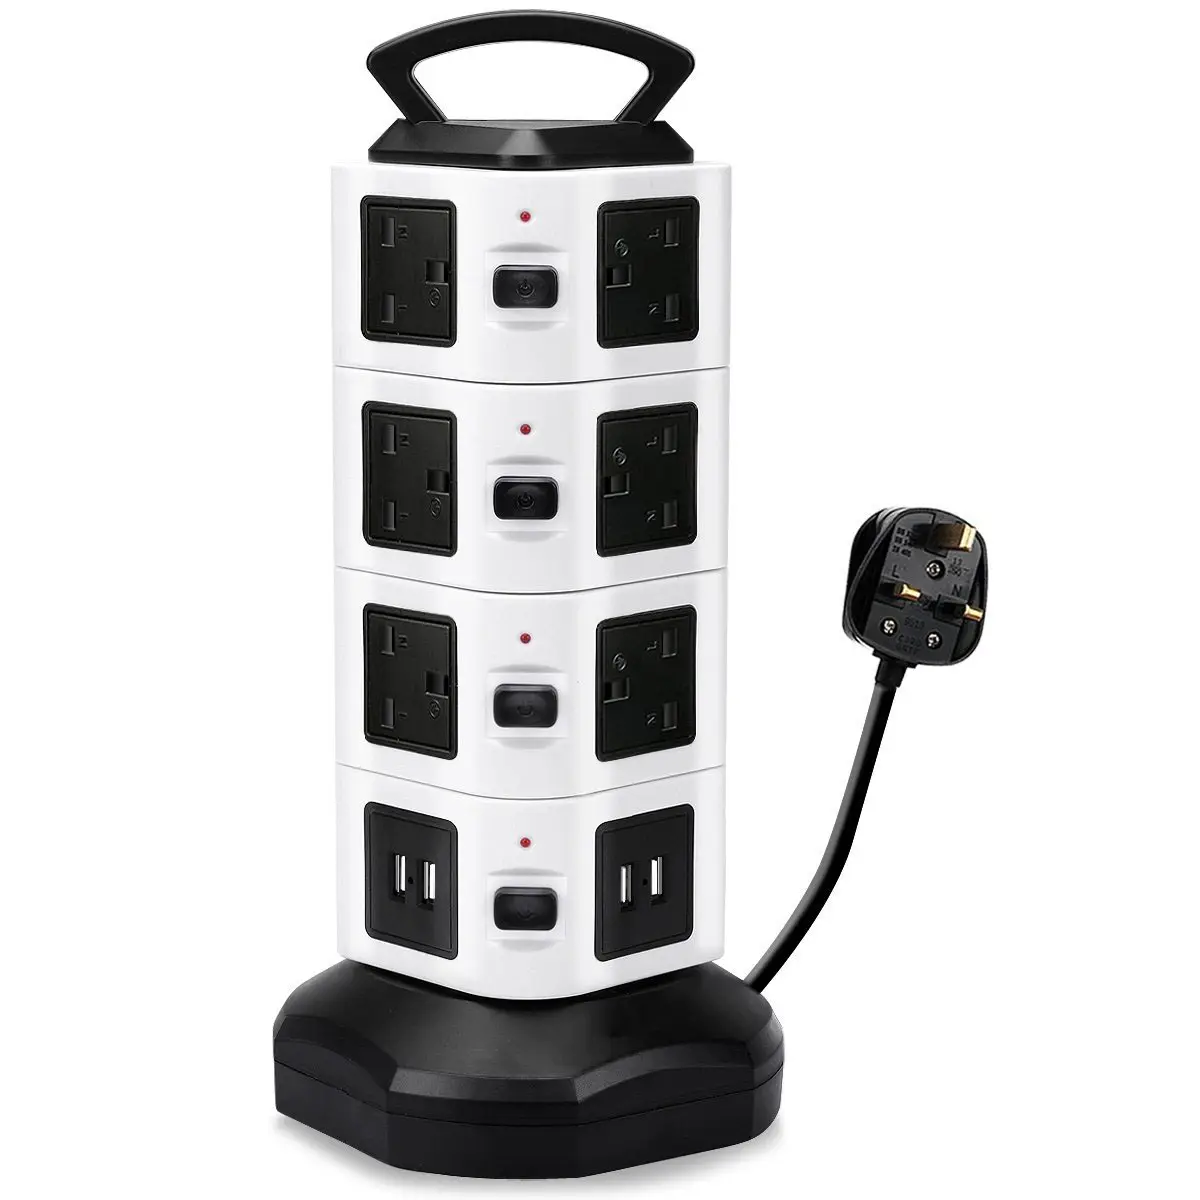 Tower Extension Lead with USB Slots, Surge Protected Multi Plug Extension 14 AC Outlets & 4 USB Ports Power Strip